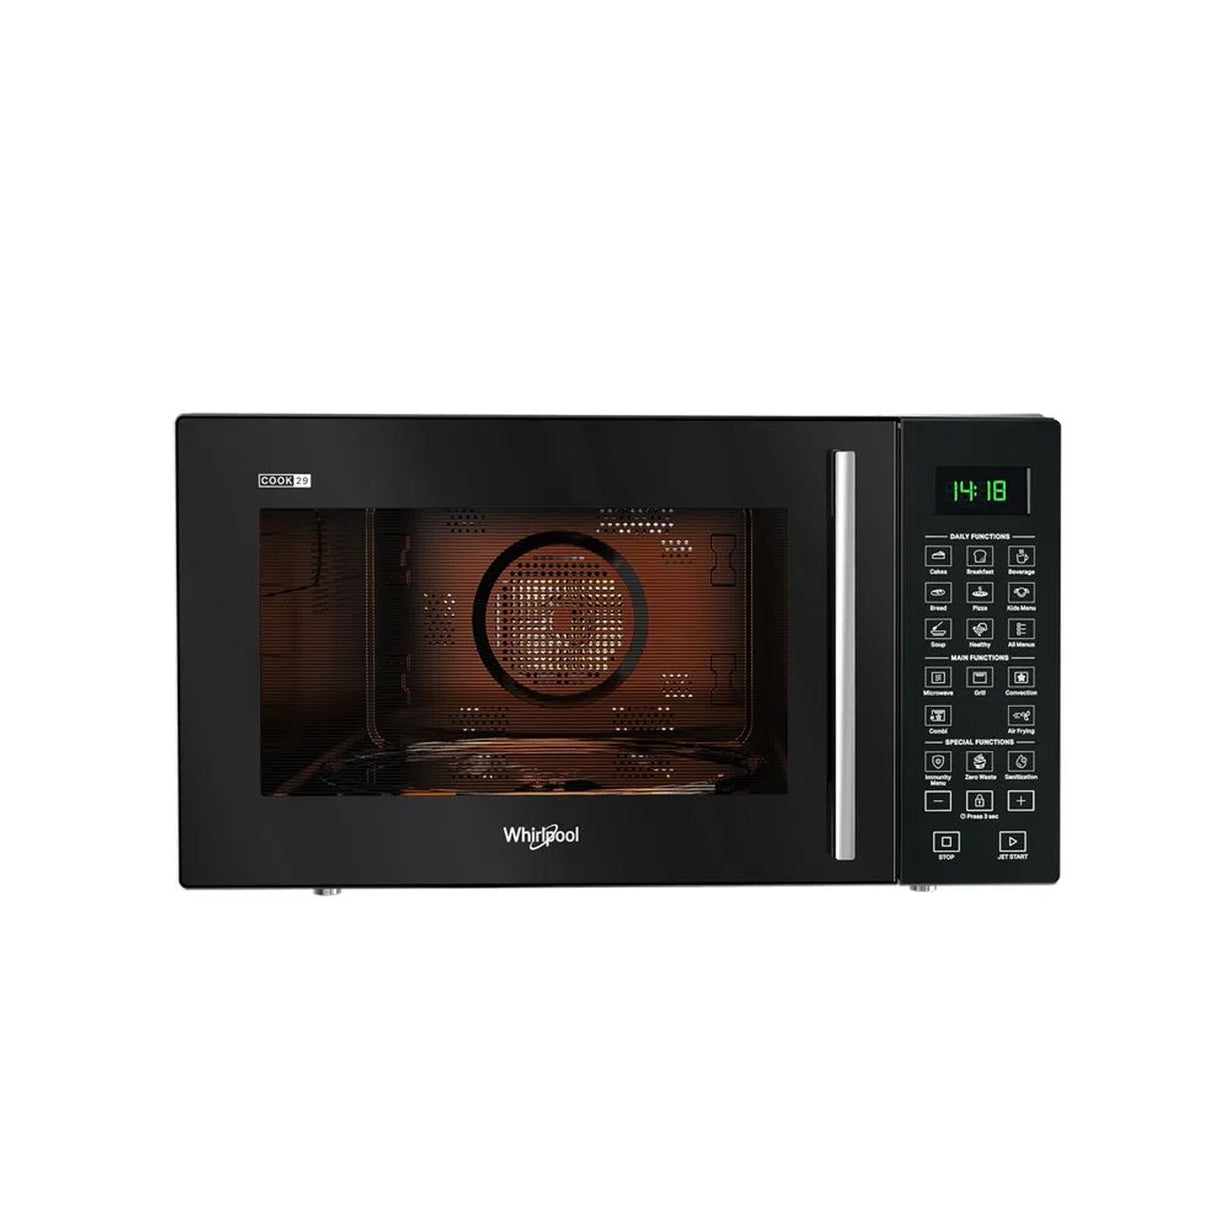 Whirlpool 29L Convection Microwave (Air-Fry, Bake, Rotisserie) (W.POOL MW 50056)